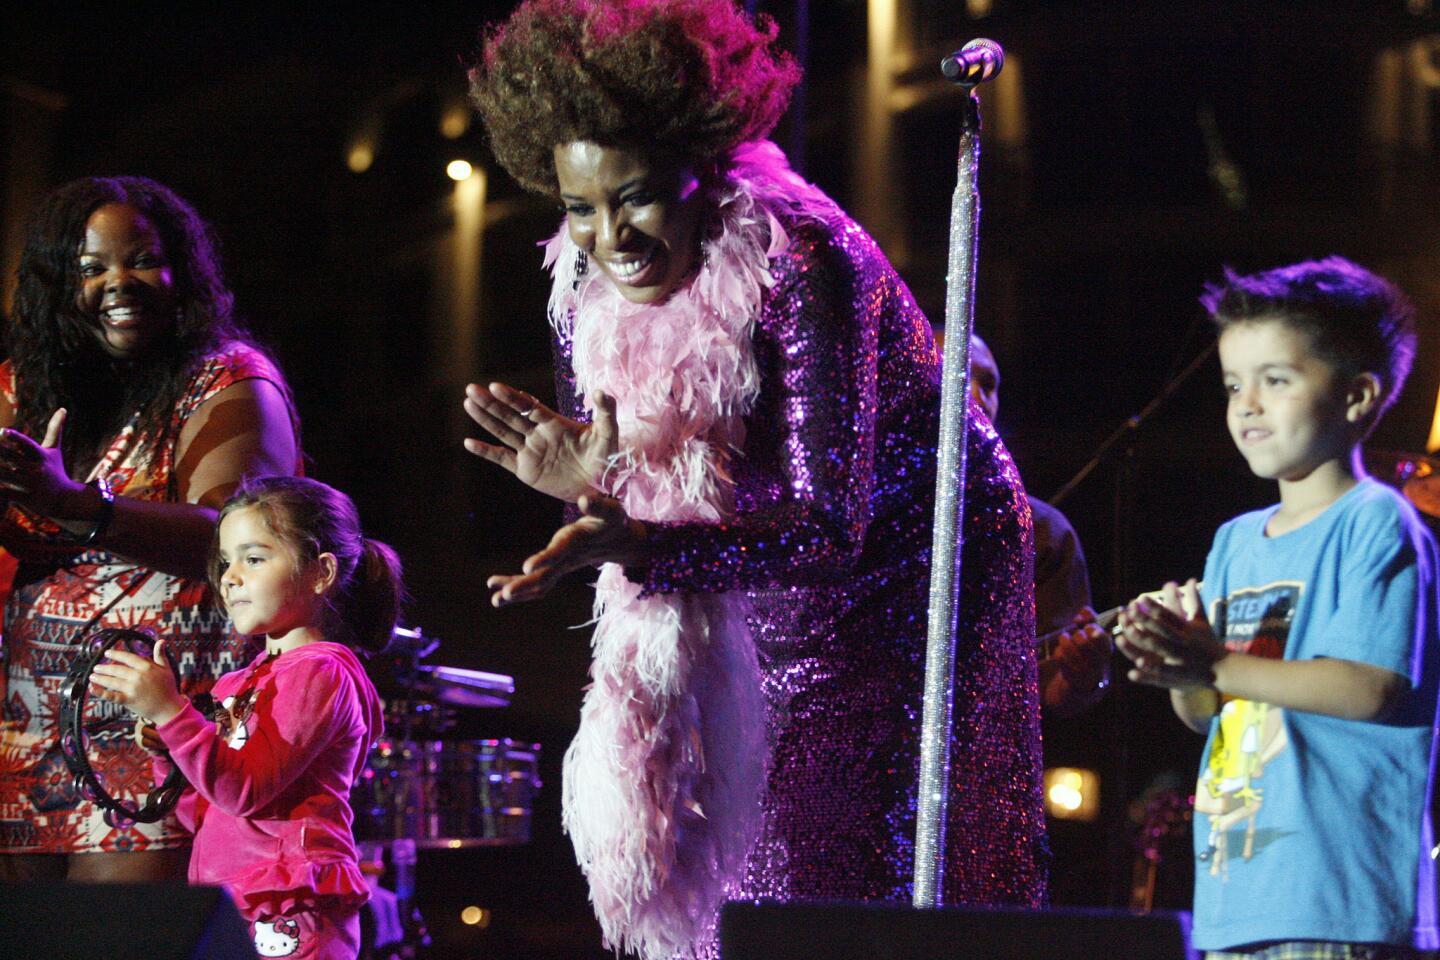 Macy Gray performs at the Americana in Glendale on Thursday, August 23, 2012.